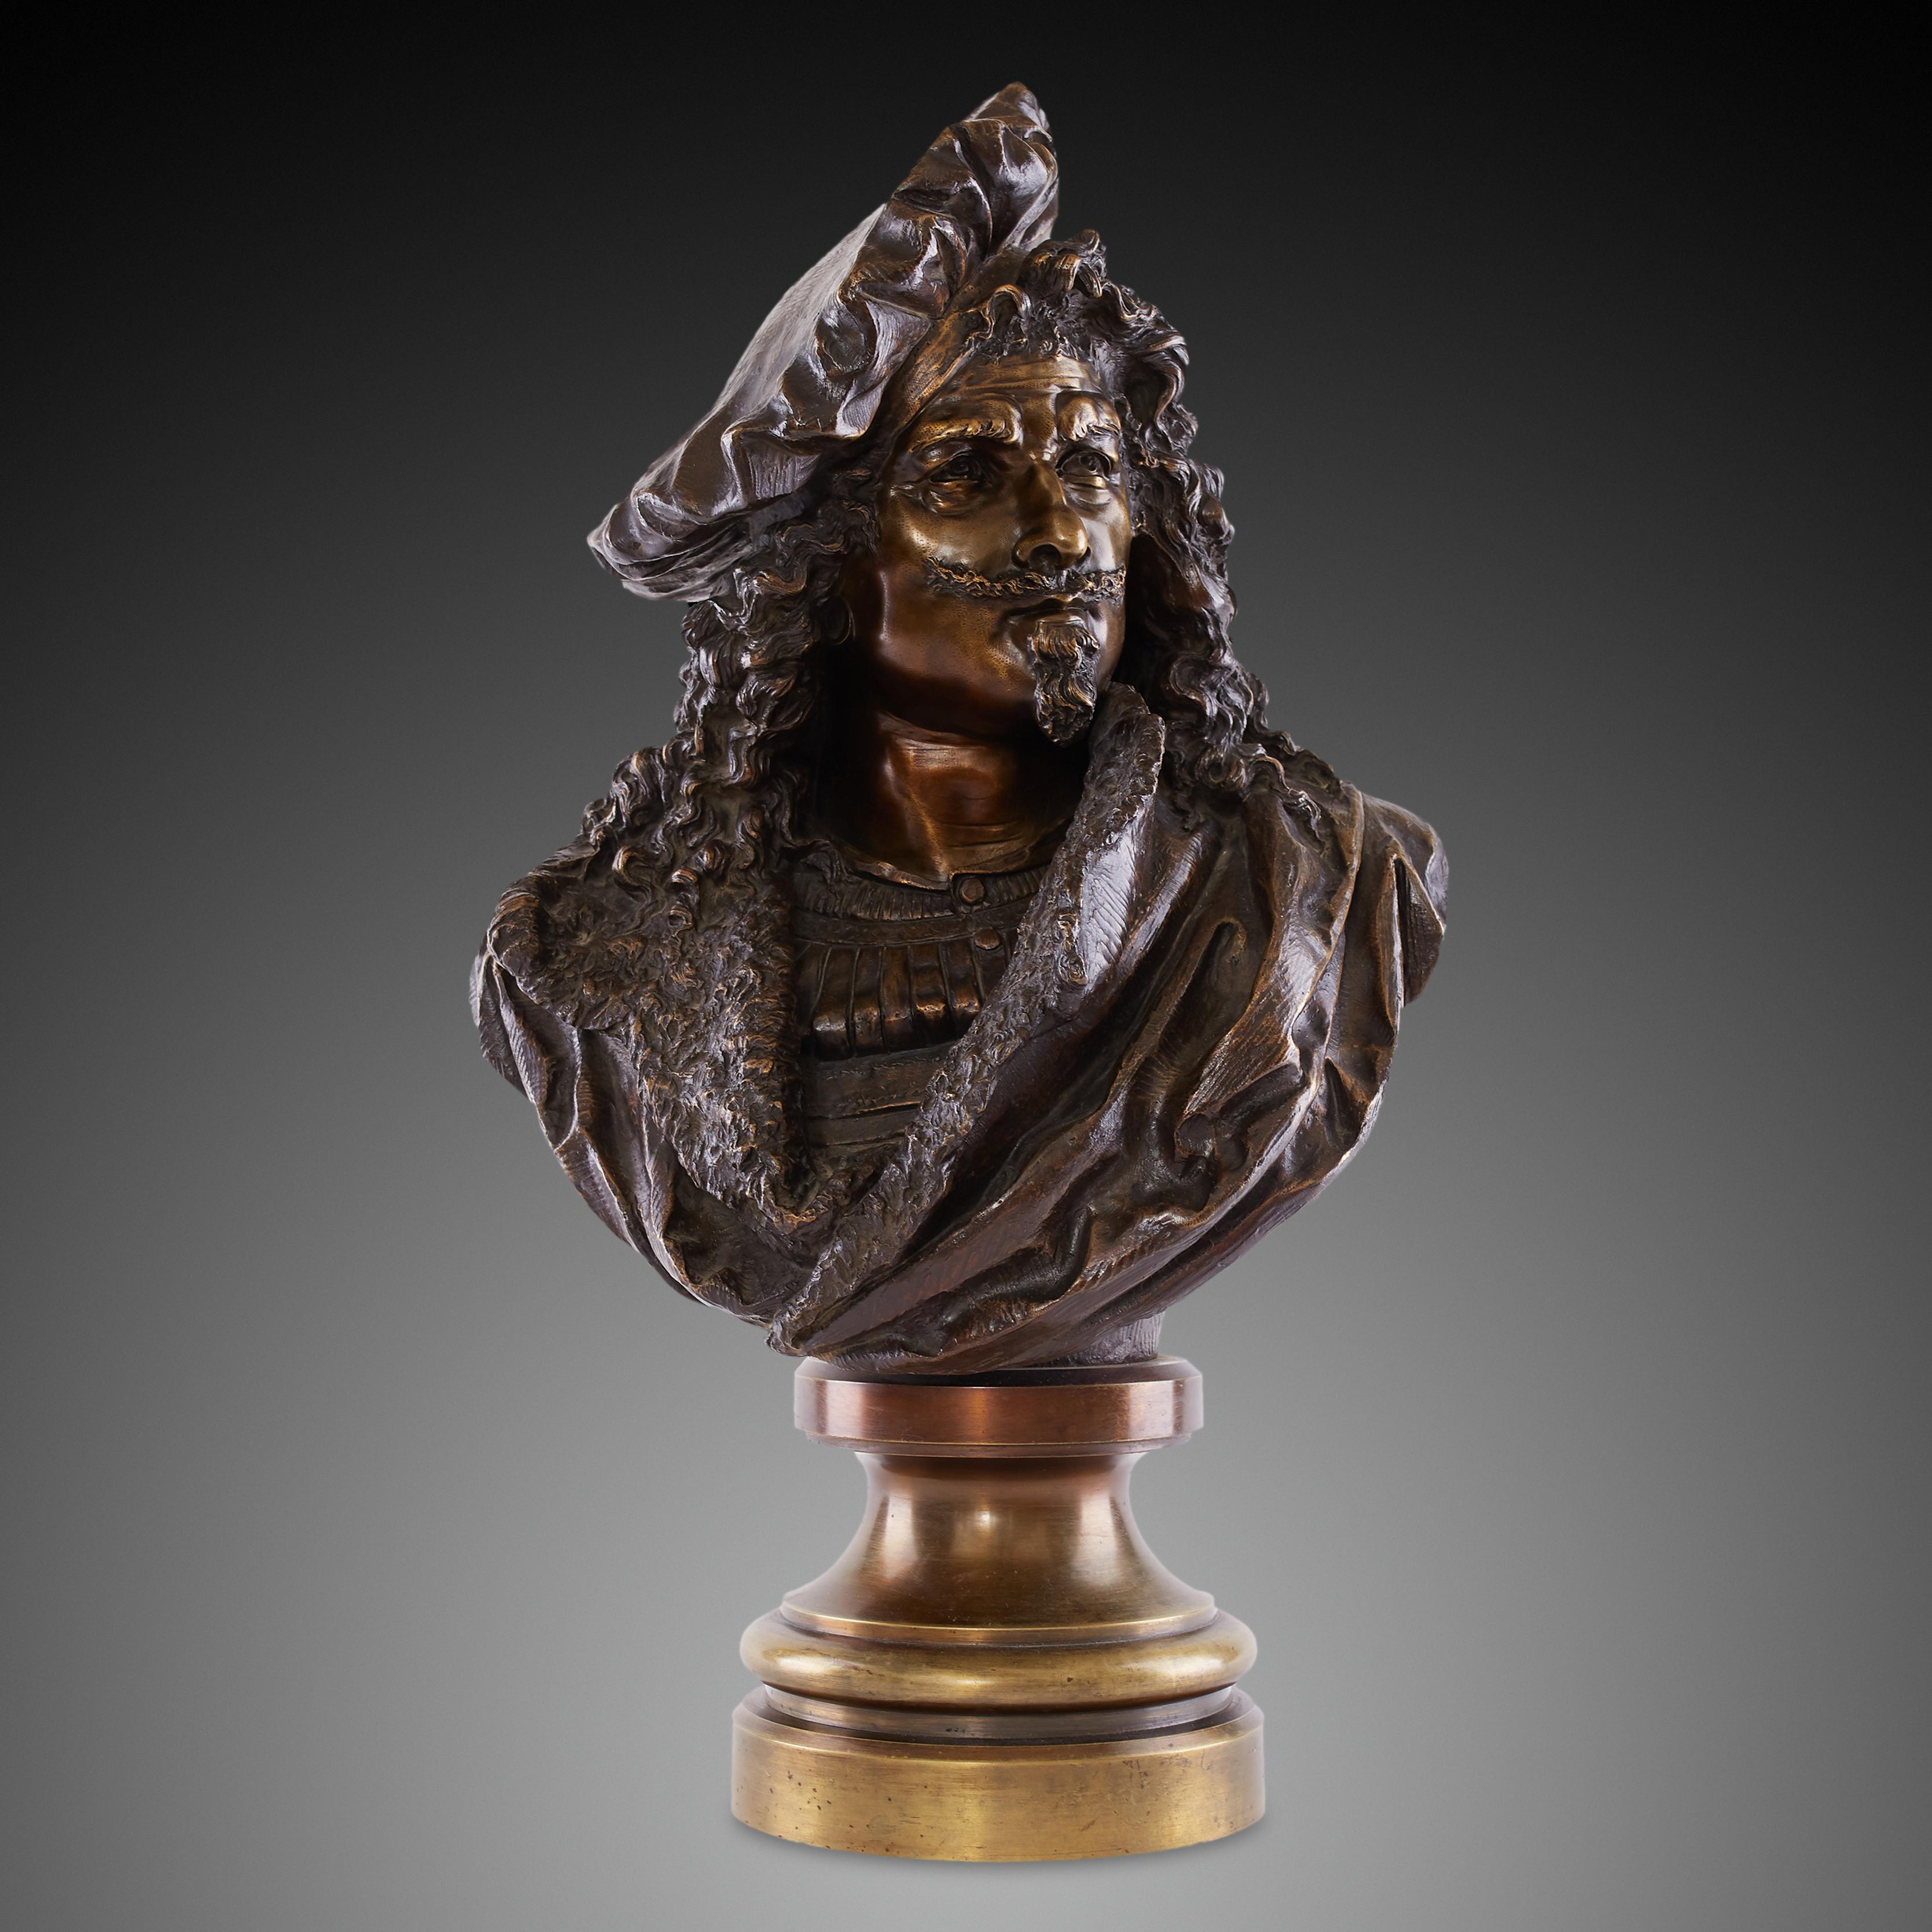 This finely detailed bust of Rembrandt van Rijn (1606-1669) is after a model by Albert Ernest Carrier-Belleuse. For a long period, Albert Carrier-Belleuse carved beautiful busts of highly admired political and scientific figures, these being very